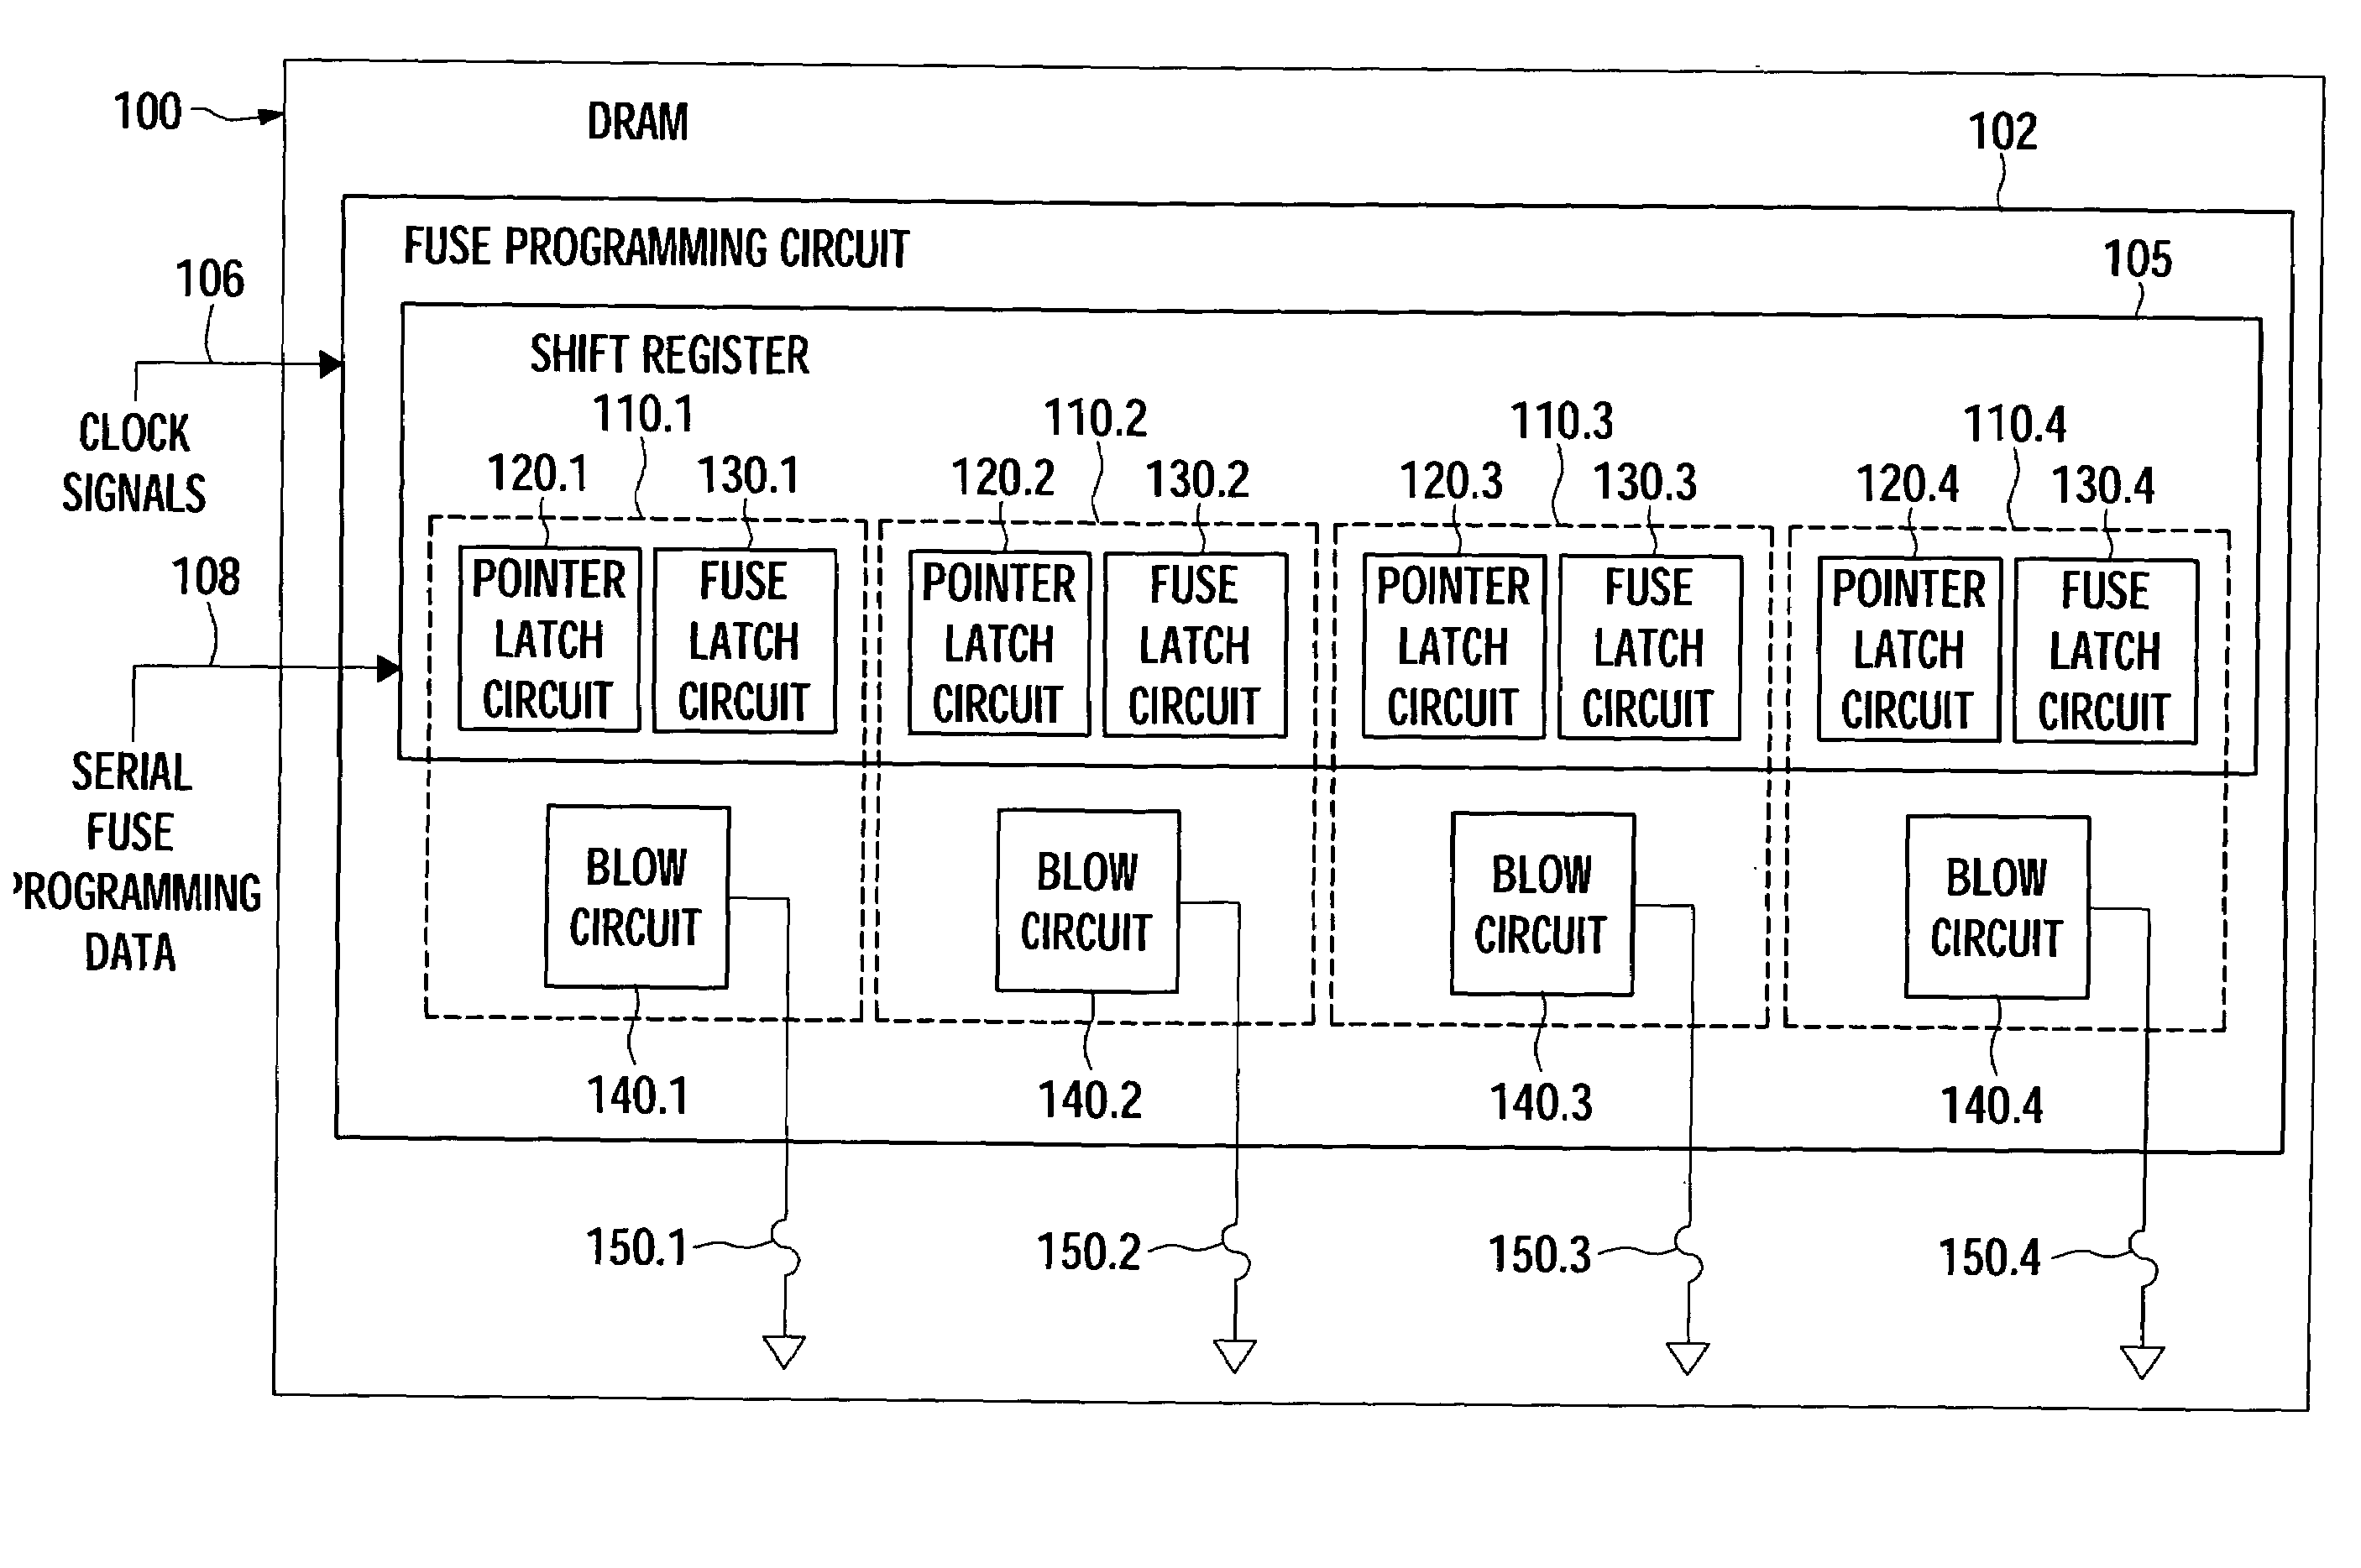 Externally clocked electrical fuse programming with asynchronous fuse selection